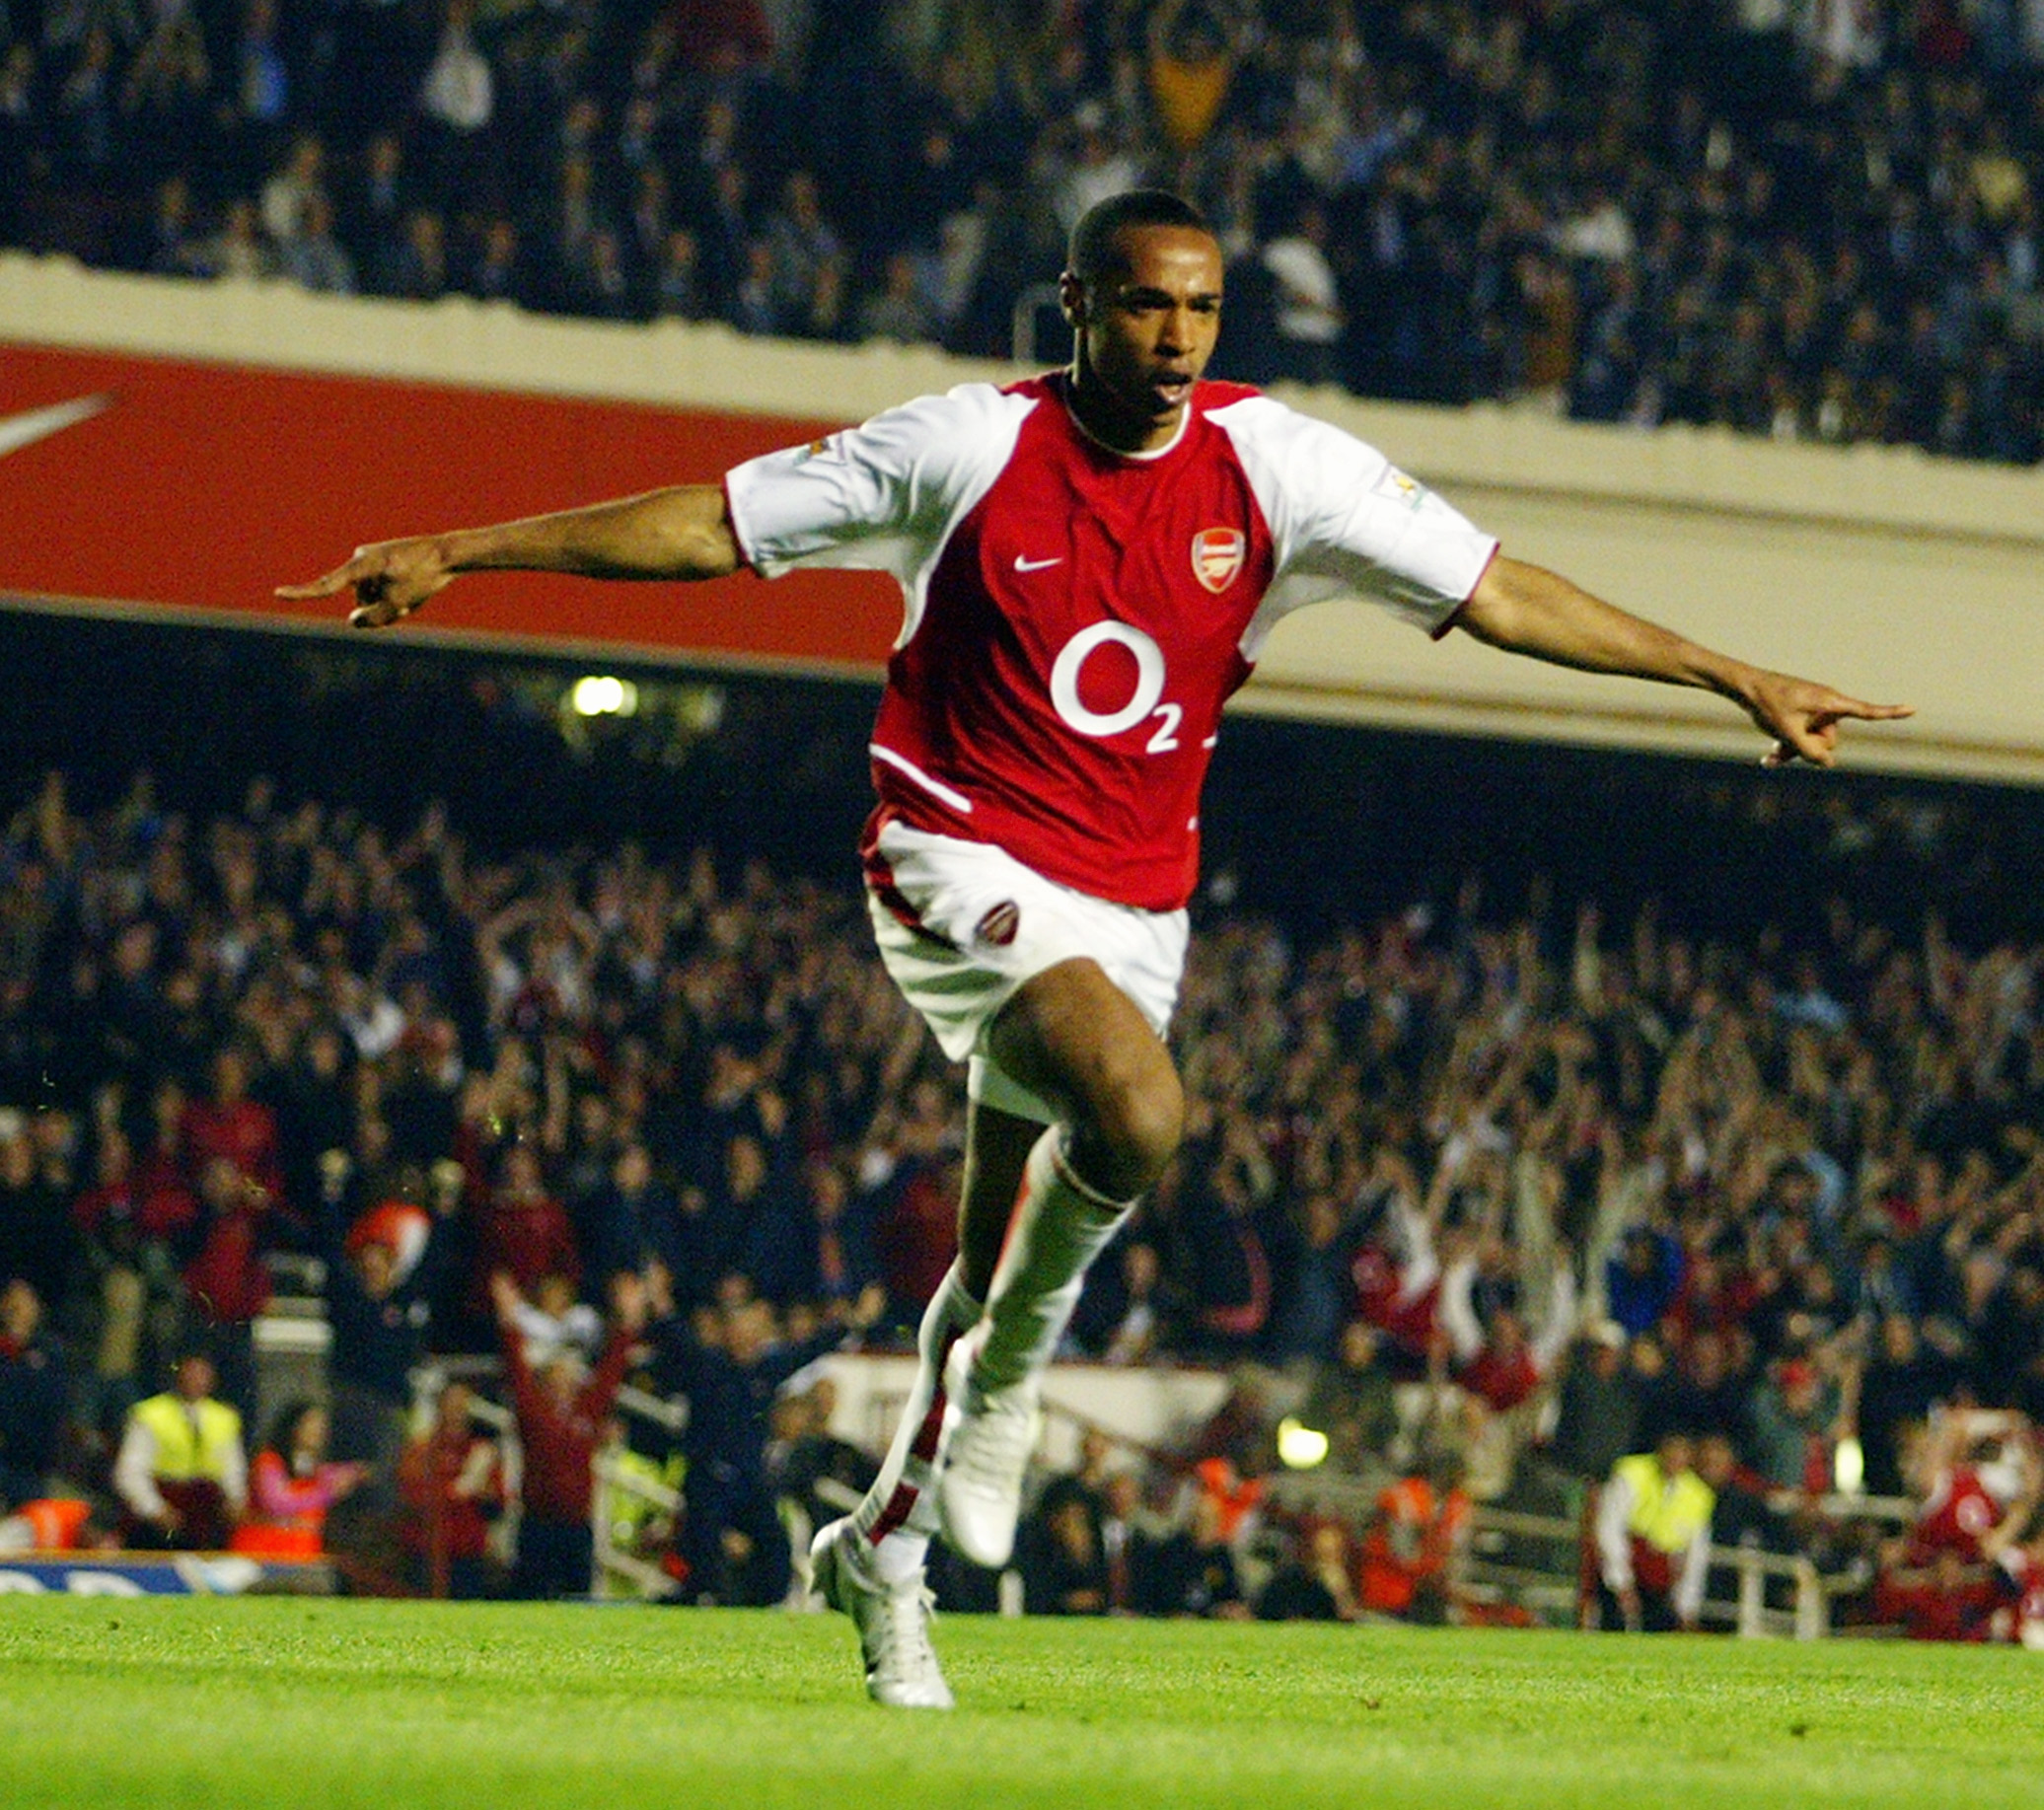 LONDON - APRIL 16:   Thierry Henry of Arsenal celebrates scoring Arsenal's second goal during the FA Barclaycard Premiership match between Arsenal and Manchester United held on April 16, 2003 at Highbury in London, England. The match ended in a 2-2 draw.